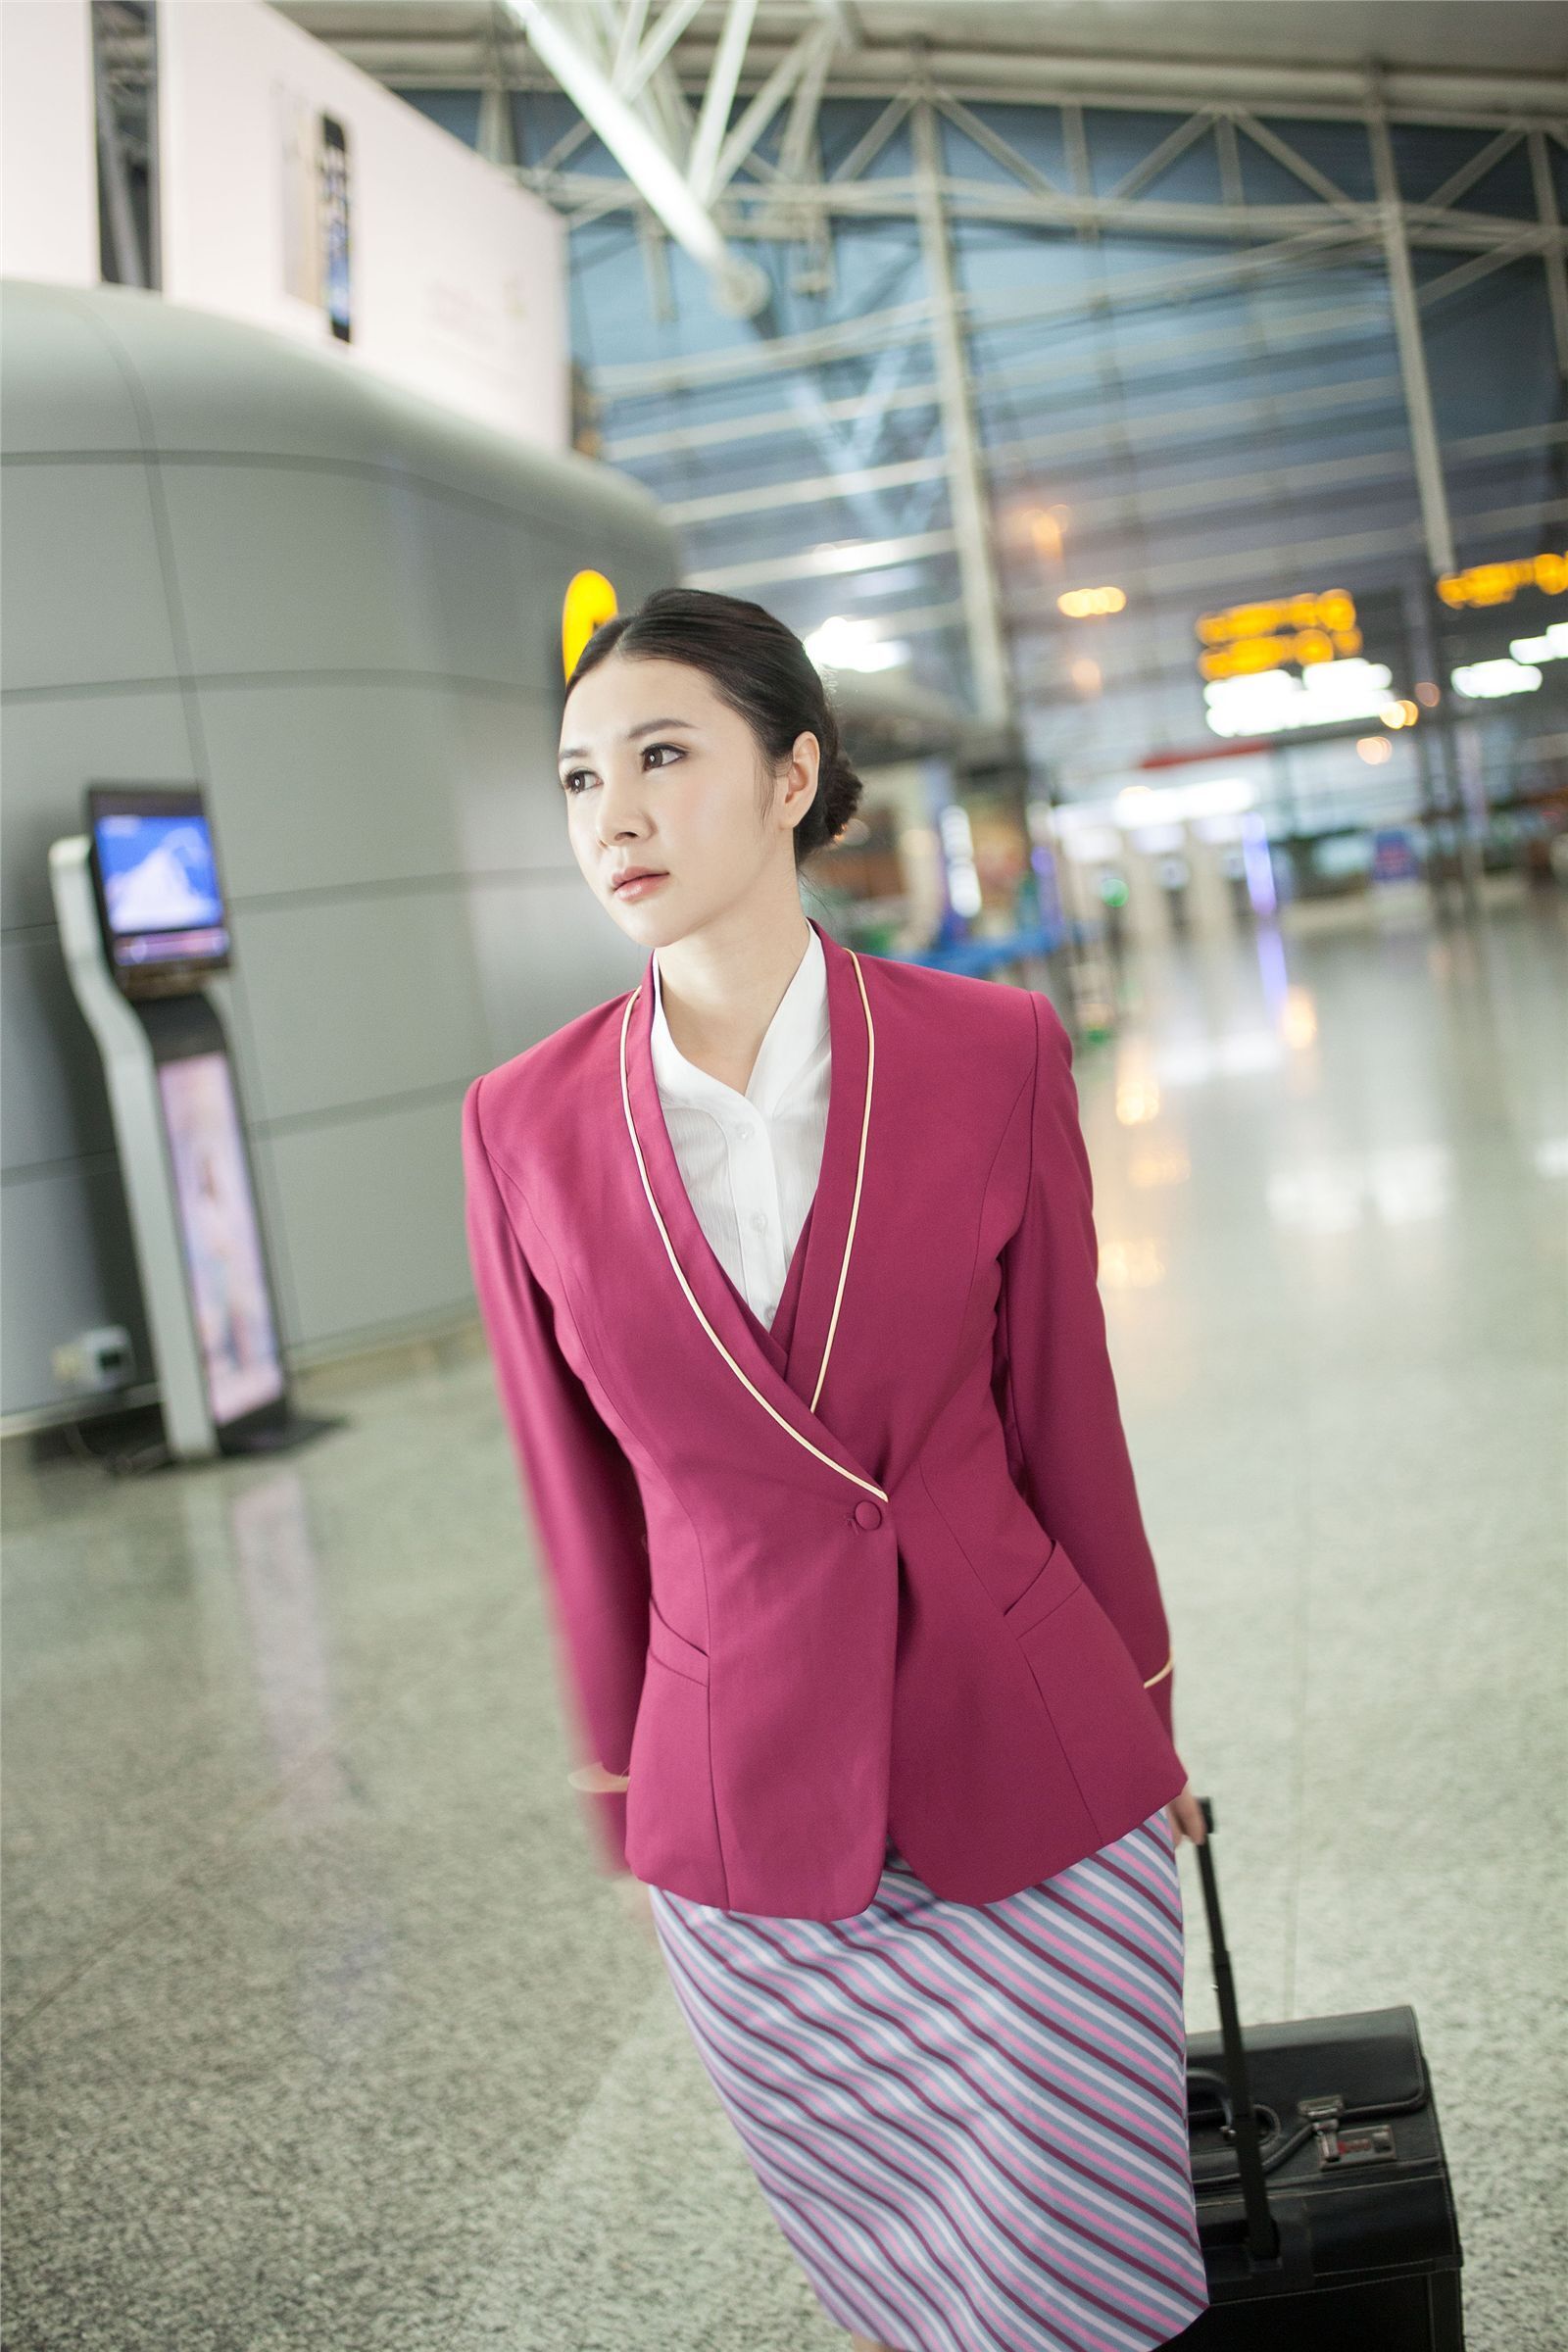 [tgod tweet goddess] Gu Xinyi's lost stewardess' private life in airport on October 23, 2014 (Part 1)